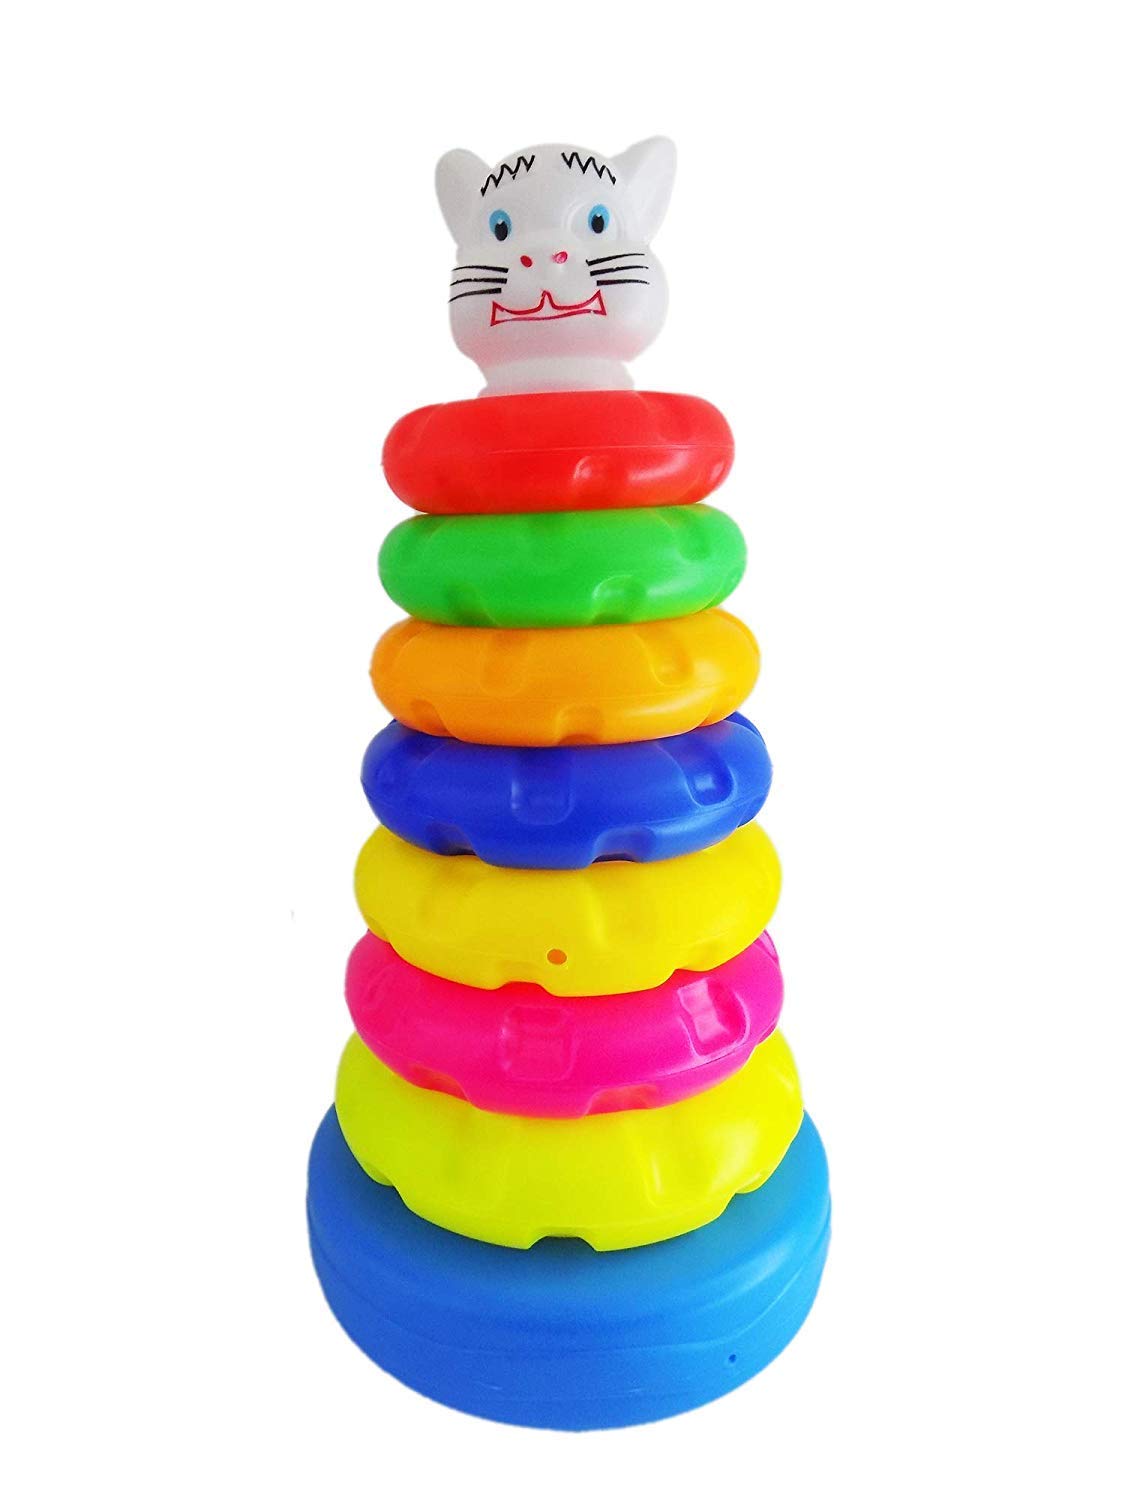 Buy Best Rainbow Stacking Rings Toy for Toddler - 7 Rings